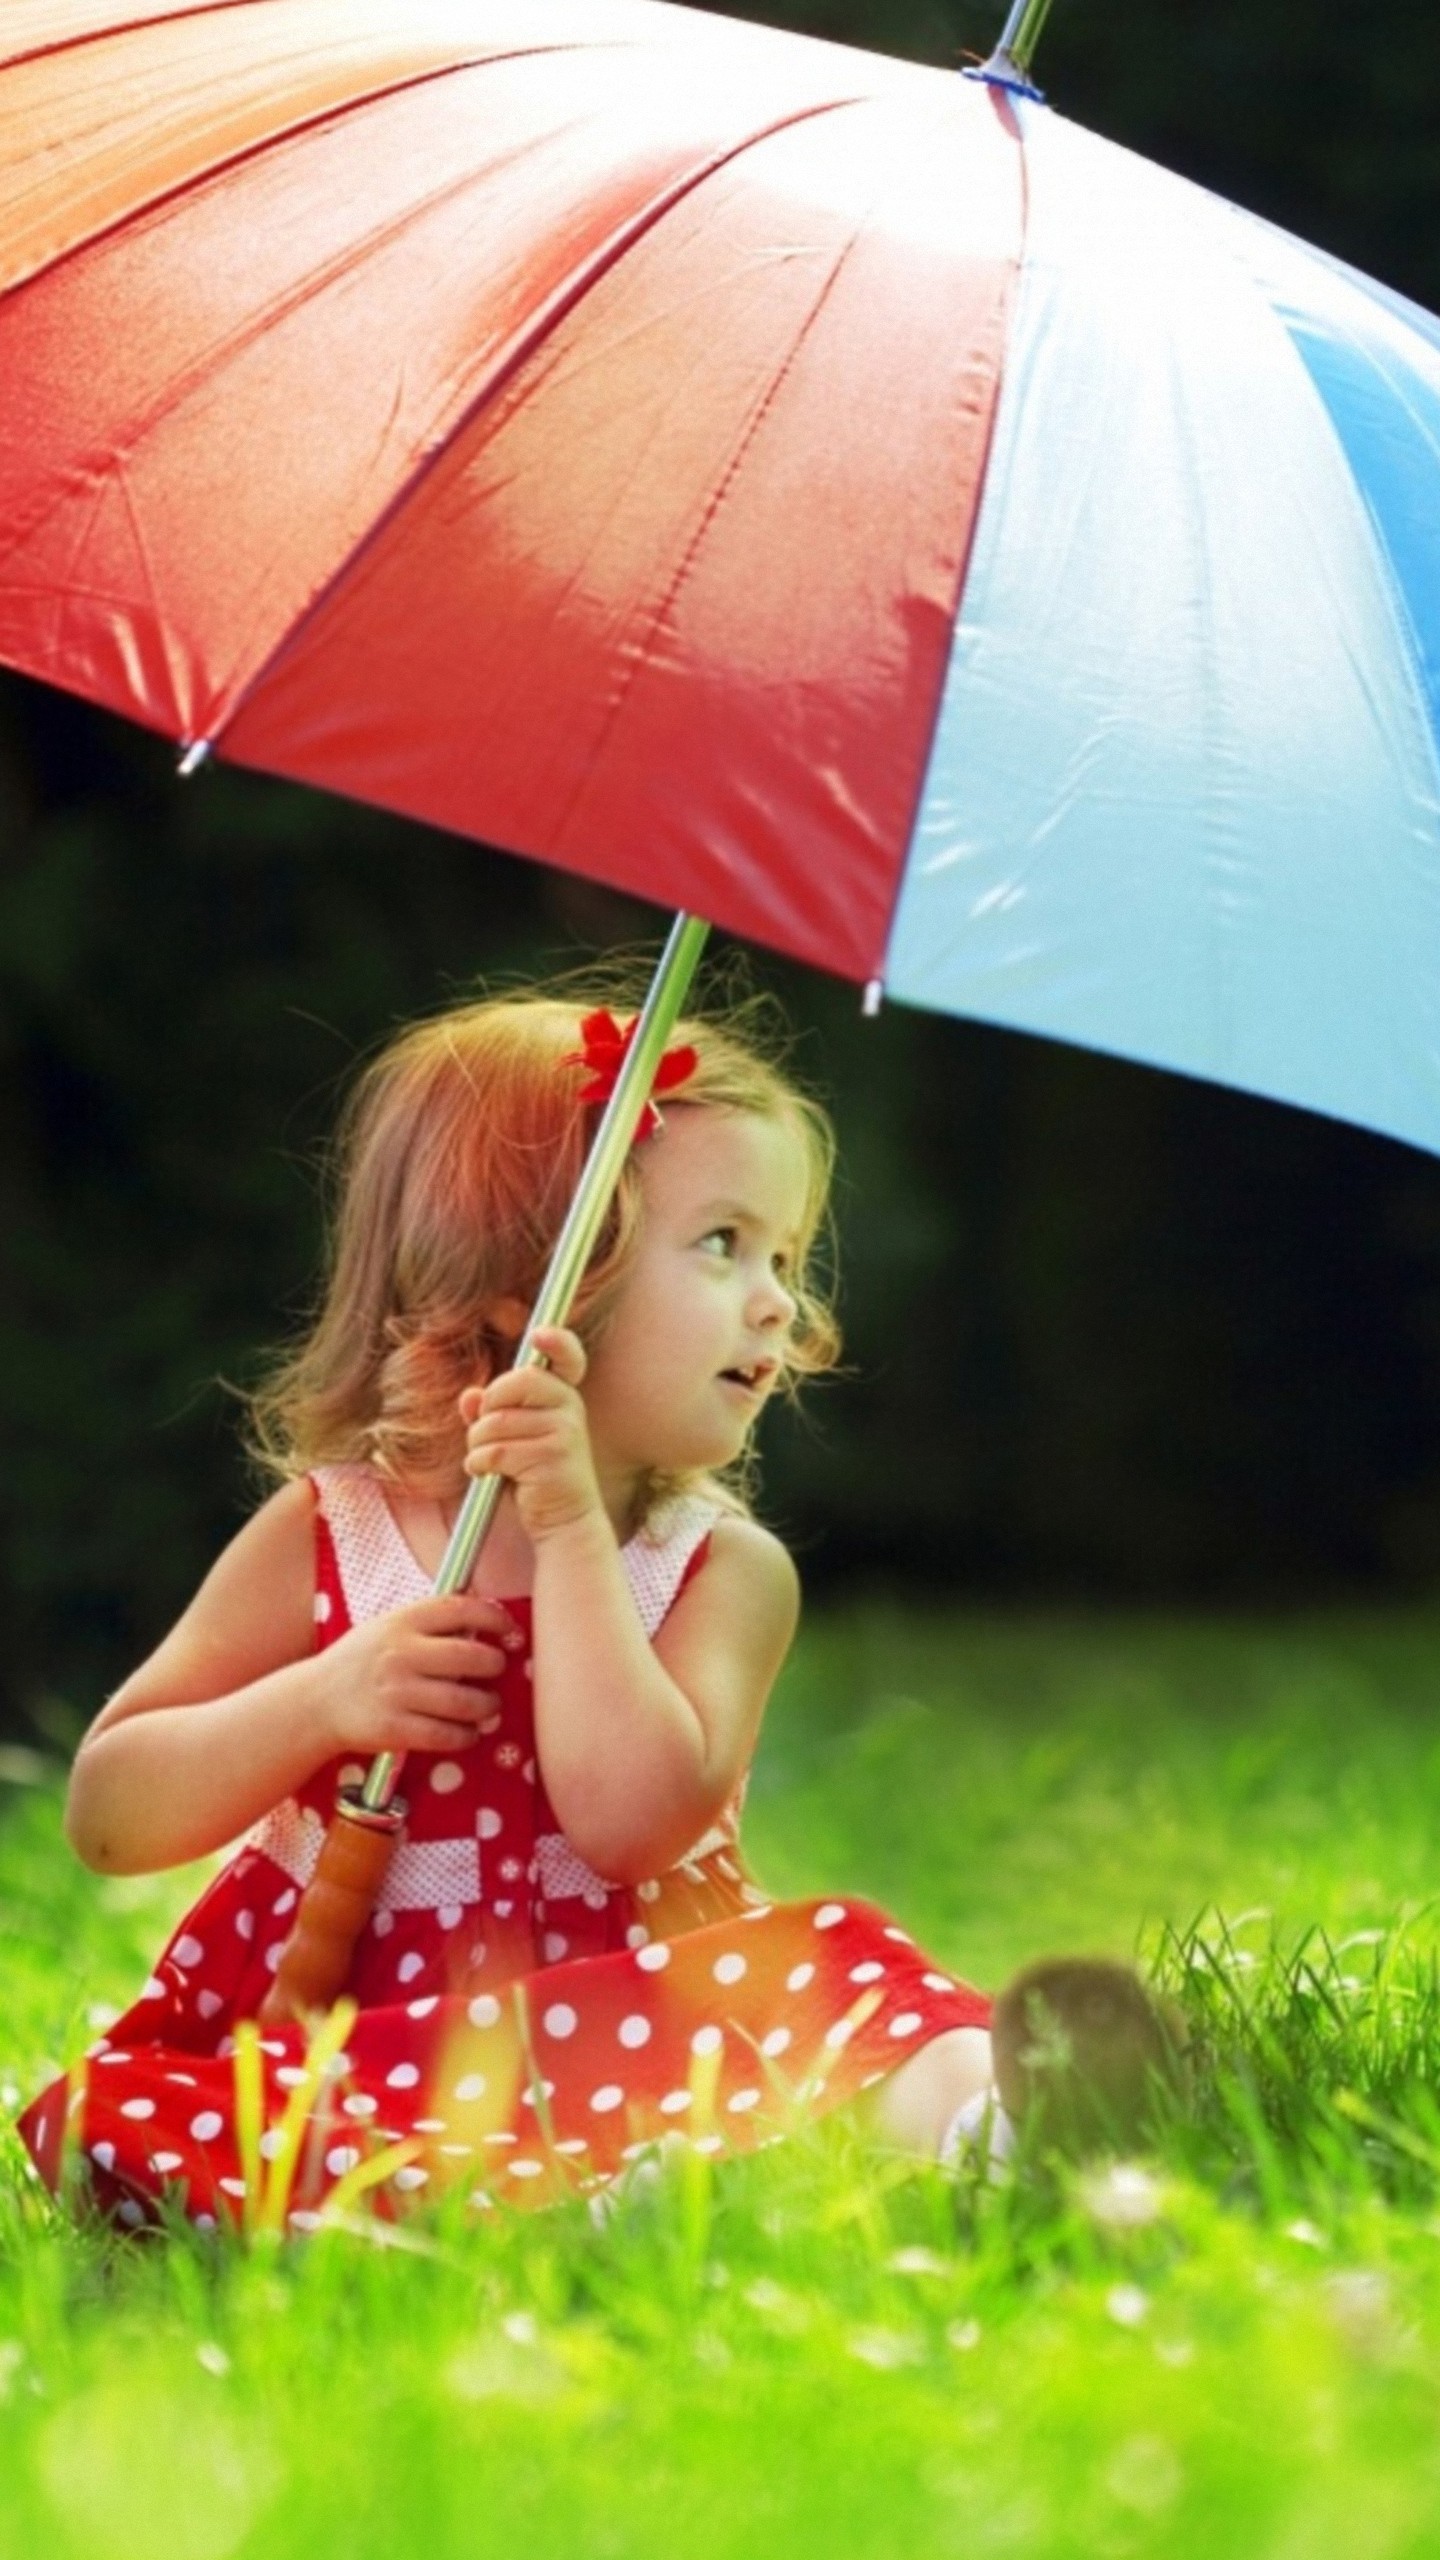 girls mobile wallpaper,umbrella,people in nature,child,grass,toddler